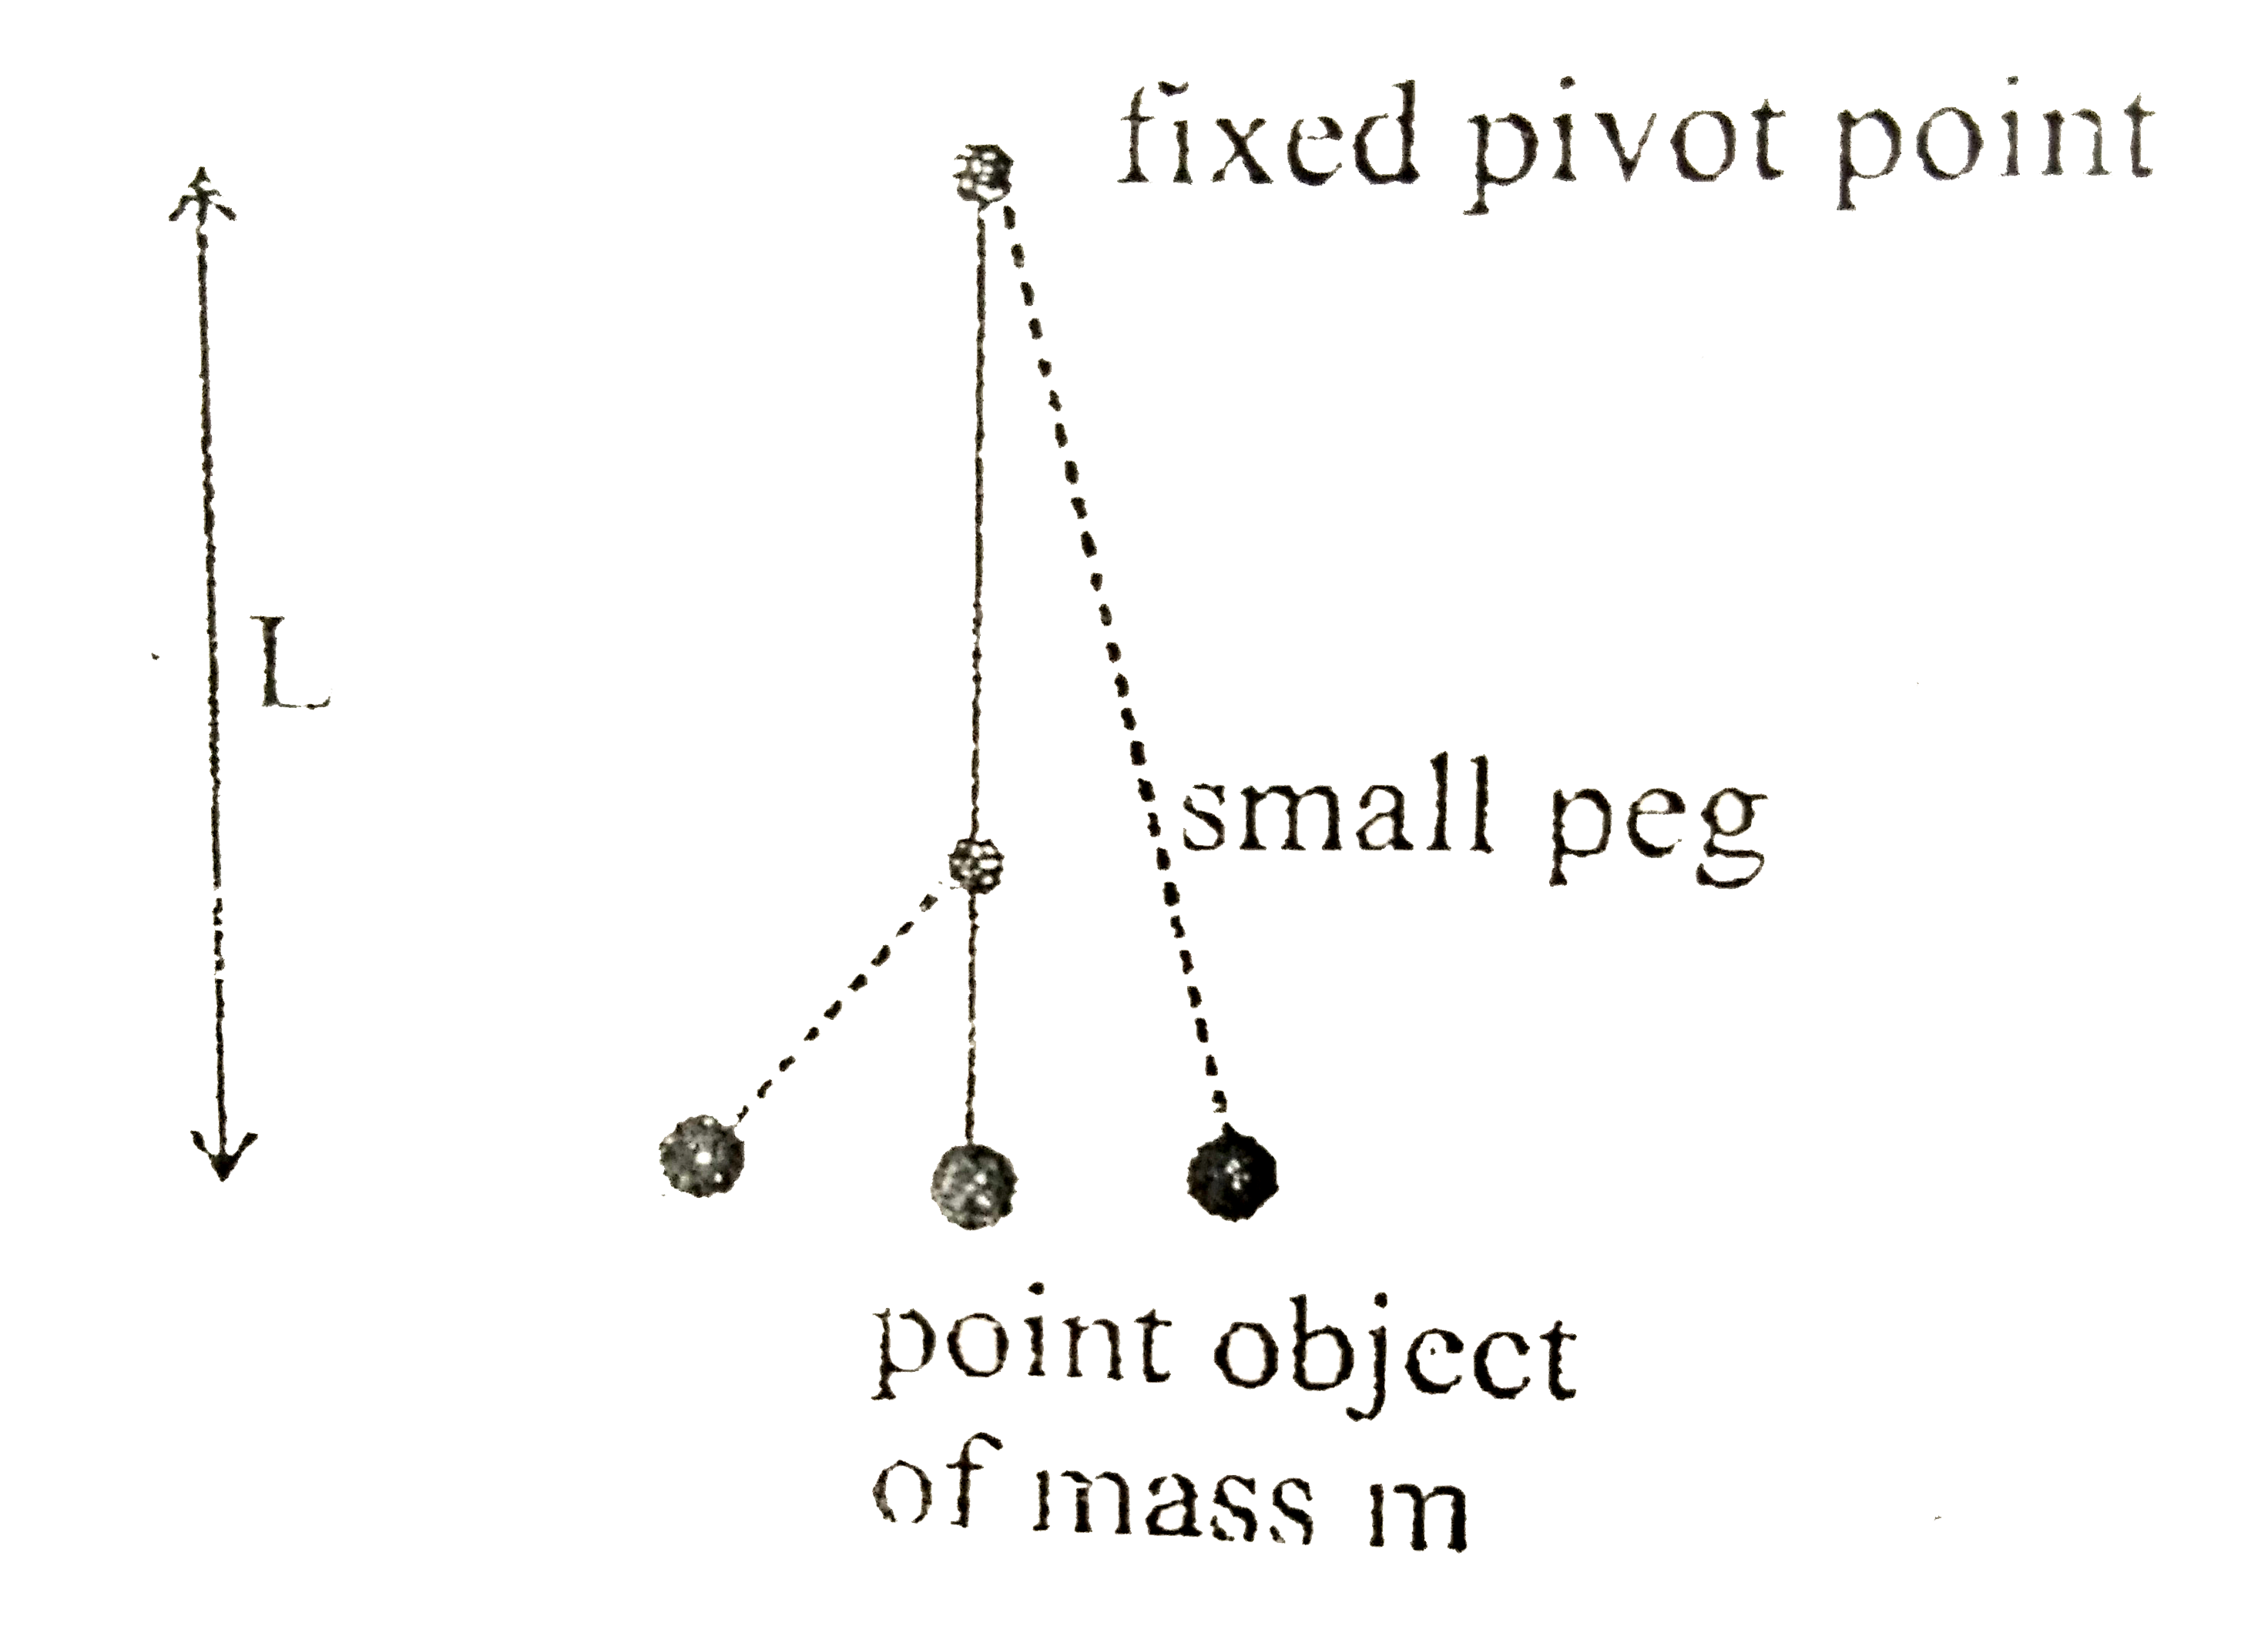 A simple pendulum of length L is constructed form a point object of mass m suspended by a massless tring attached to a fixed pivot point. A small peg is placed a distance 2L//3 directly below the fixed pivot point. A small peg is placed a distance 2L//3 directly below the fixed pivot point so that the pendulum would wing as shown in the figure. the mass is displaced 5 degrees form the vertical and released. How does it take to return to its starting position.